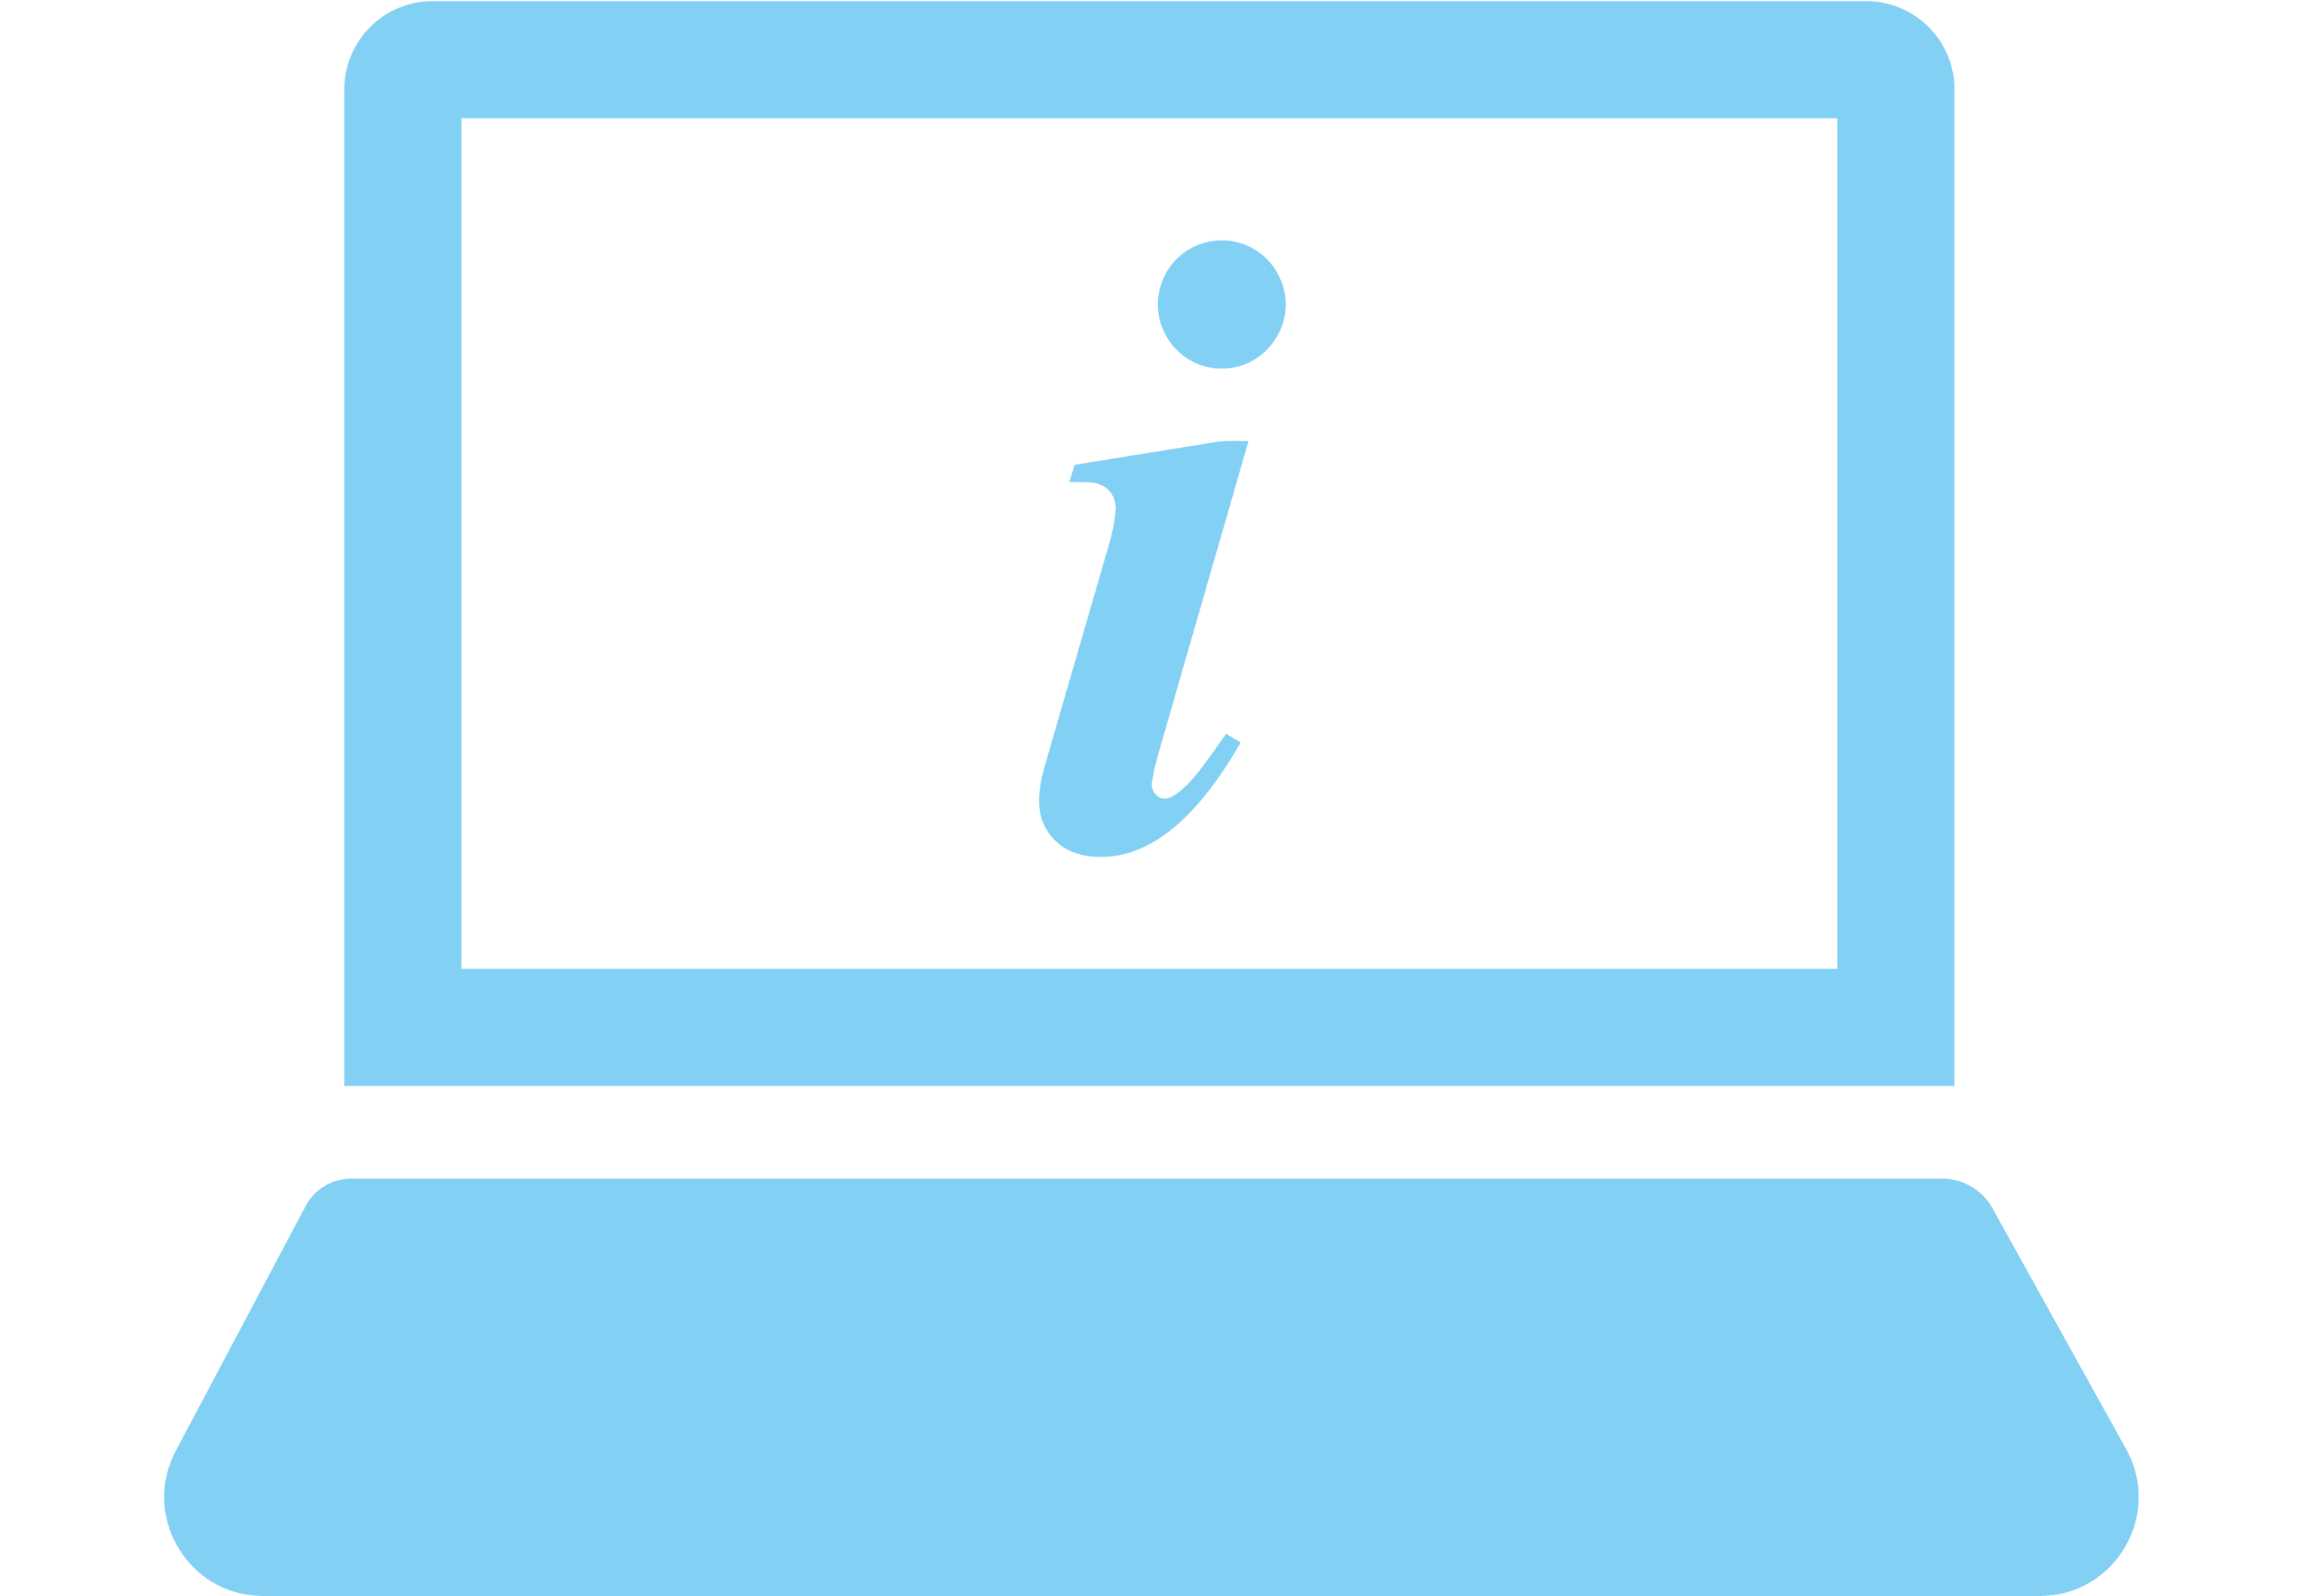 A blue icon showing a laptop with an information "i" on the screen